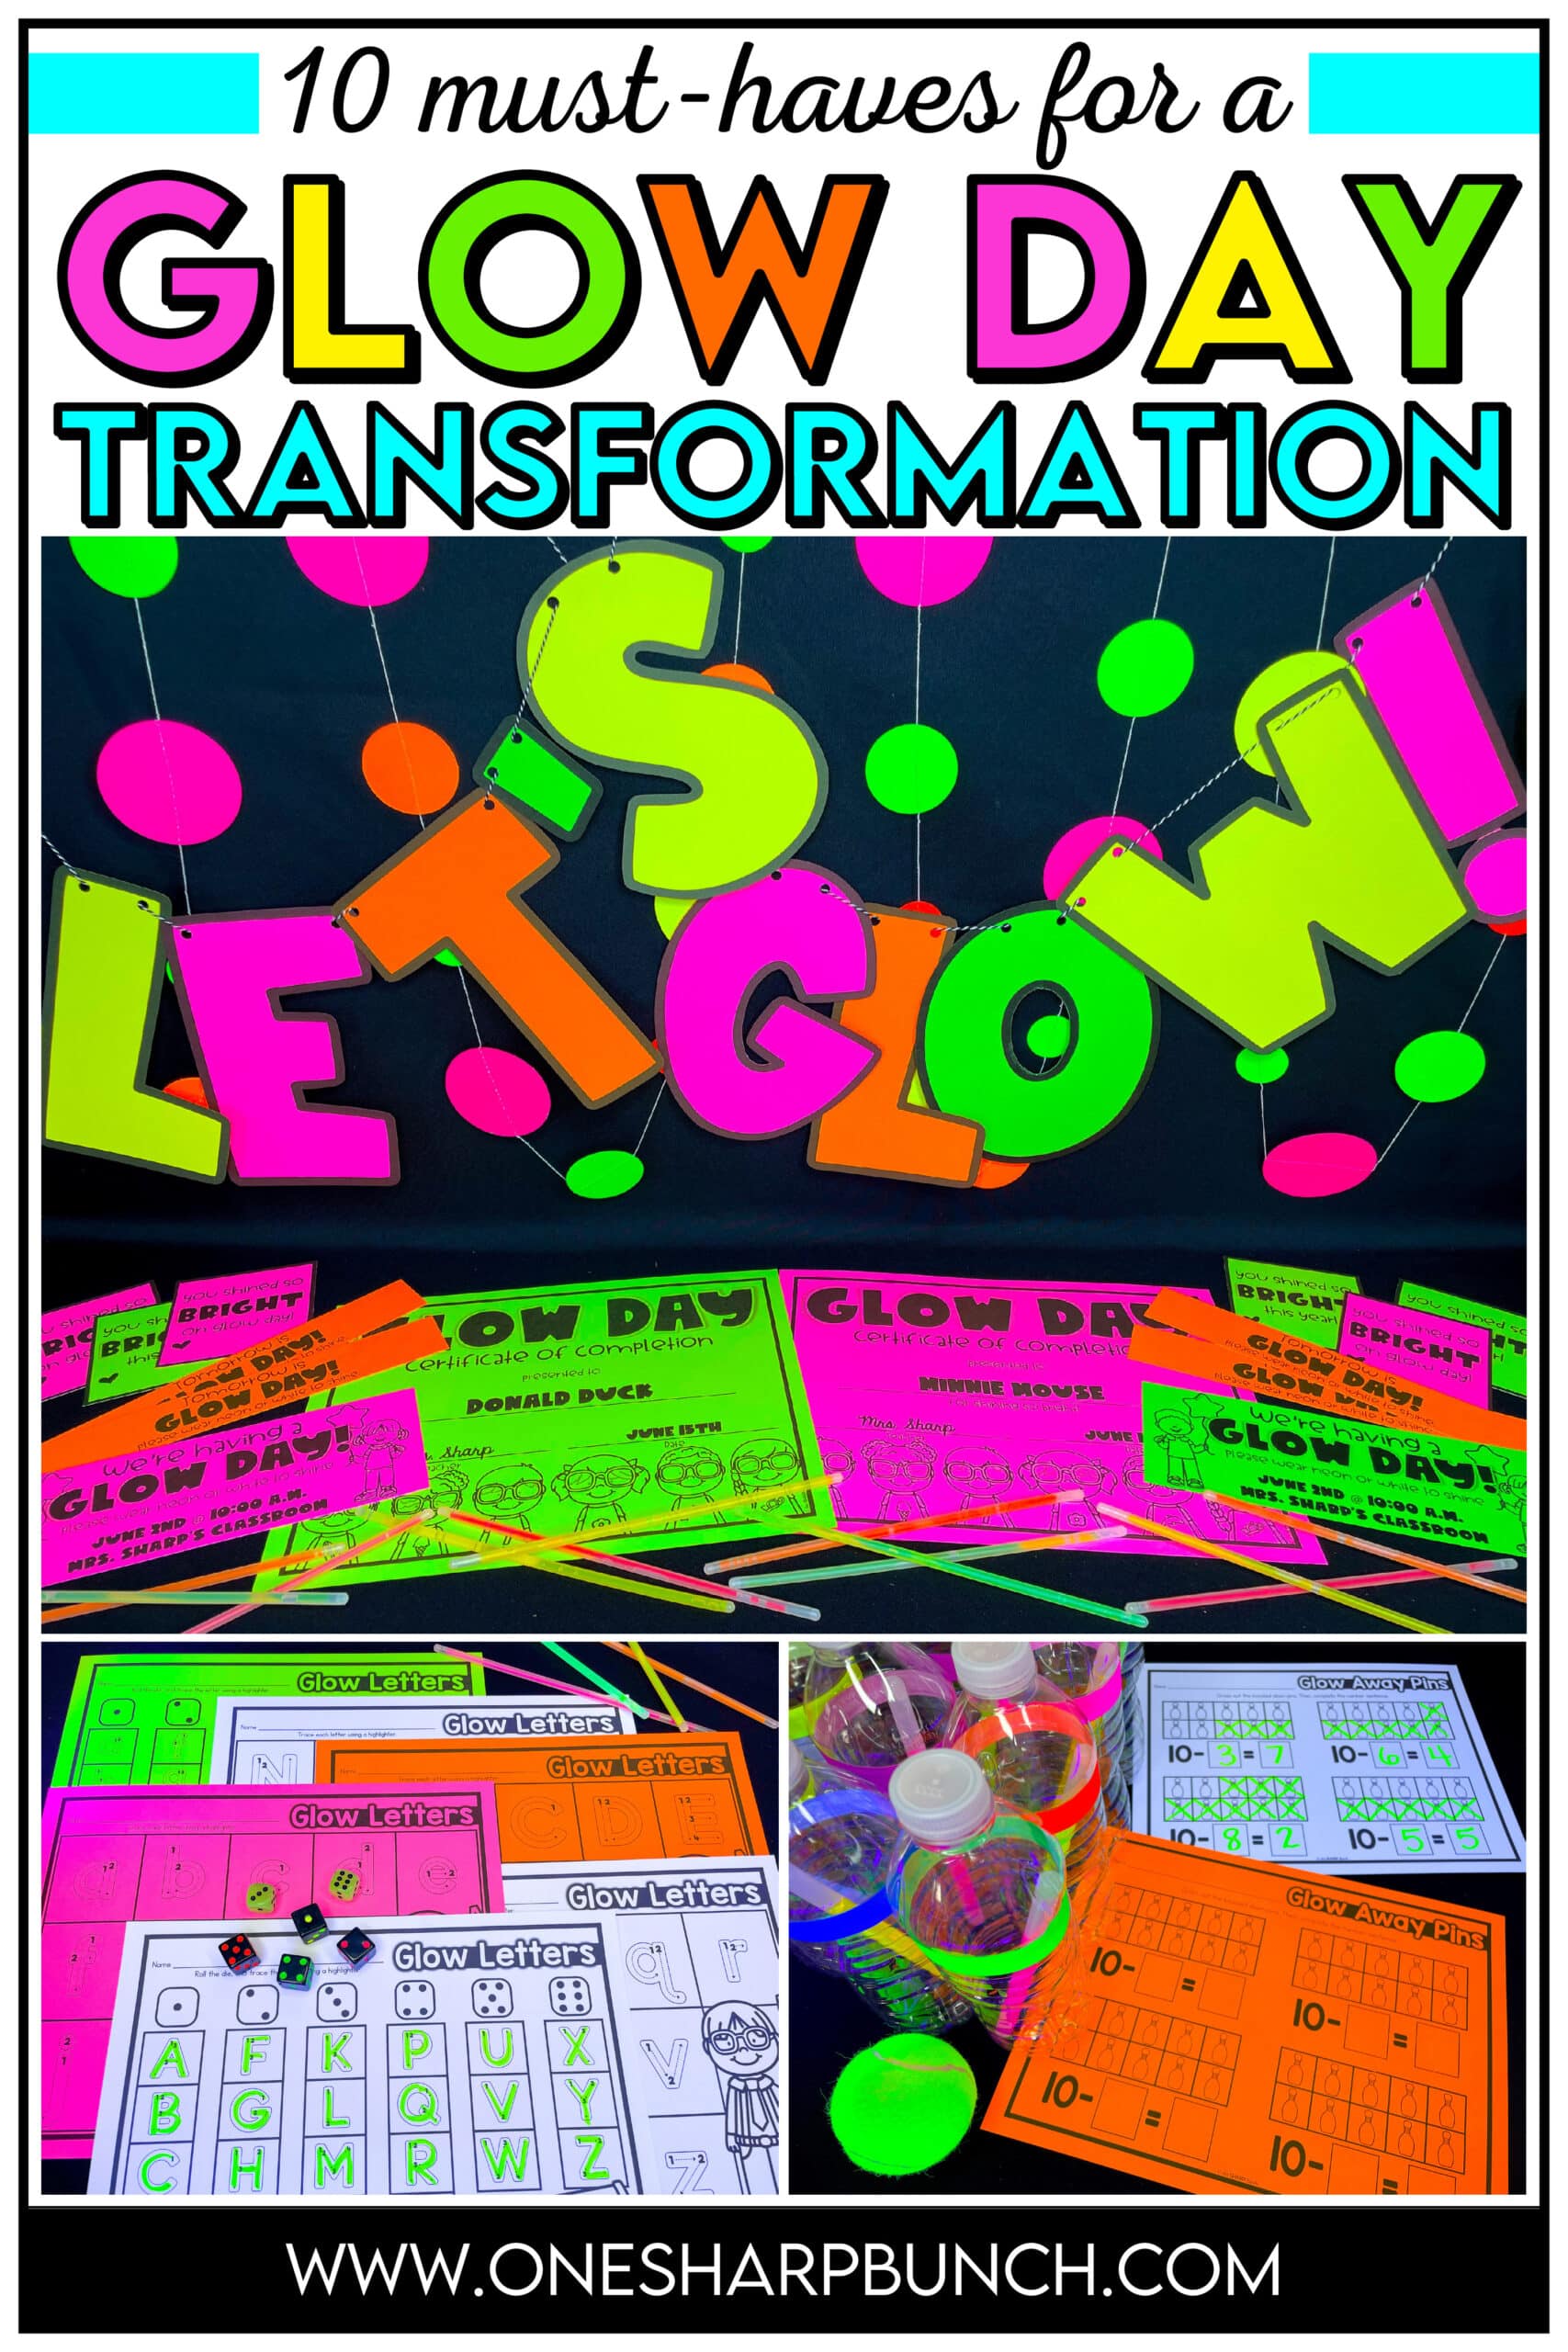 Throw an epic classroom Glow Day with this Glow Day supply list that offers everything you need to make this a memorable day for you and your early elementary students! A classroom Glow Day transformation just wouldn't be the same without these classroom Amazon must-haves for Glow Day. This list of Glow Day supplies includes glow day decorations, glow day activities, and more! Learn how to use these Glow Day items for your end of the year Glow Day math stations and Glow Day literacy stations!